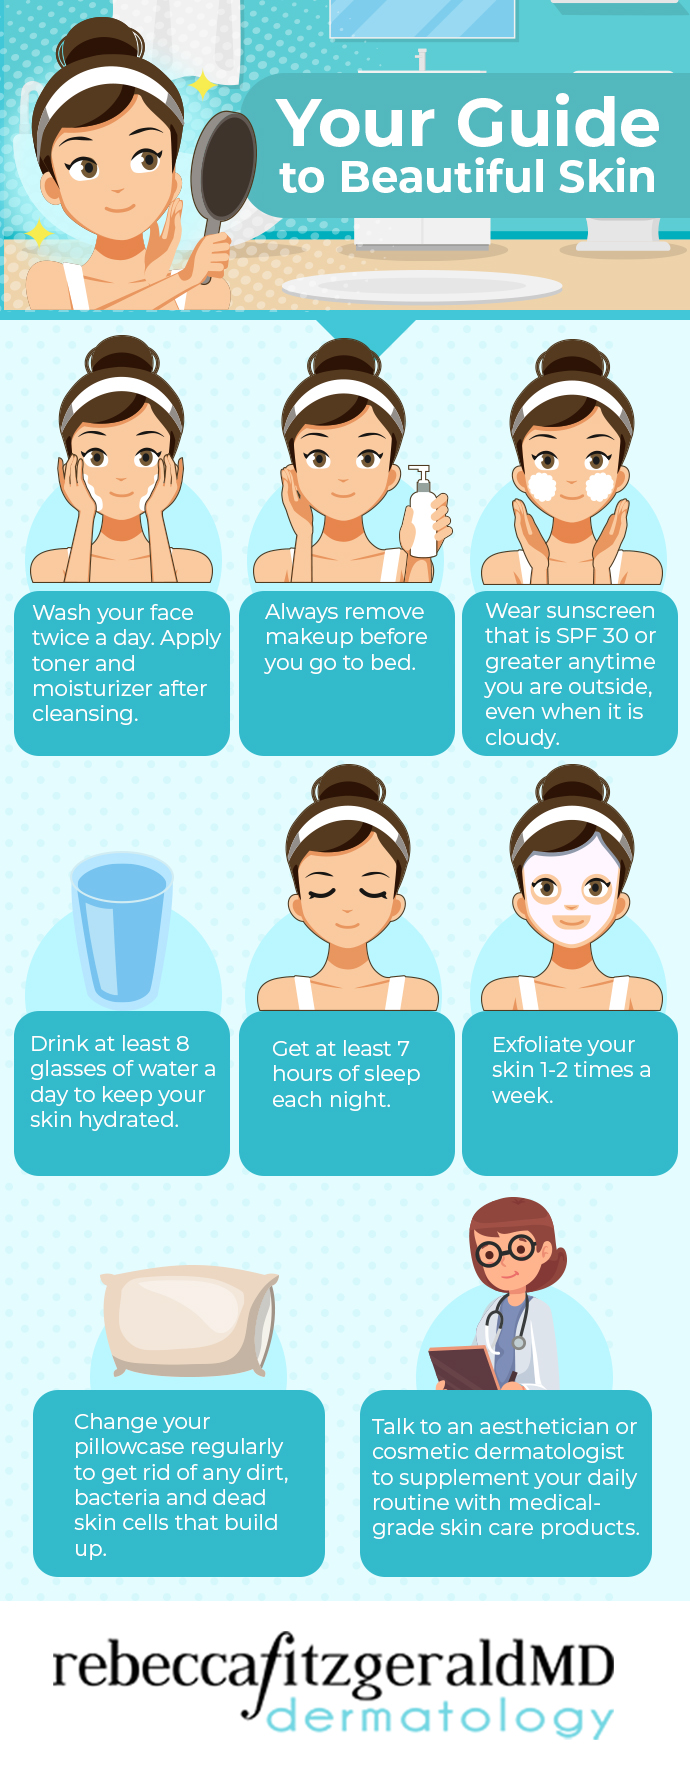 skin care infographic - wash your face morning and night; always remove makeup before going to bed, wear sunscreen daily, drink 8 glasses of water daily; get at least 7 hours of sleep, exfoliate skin 1 or 2 times a week, change pillowcase regularly